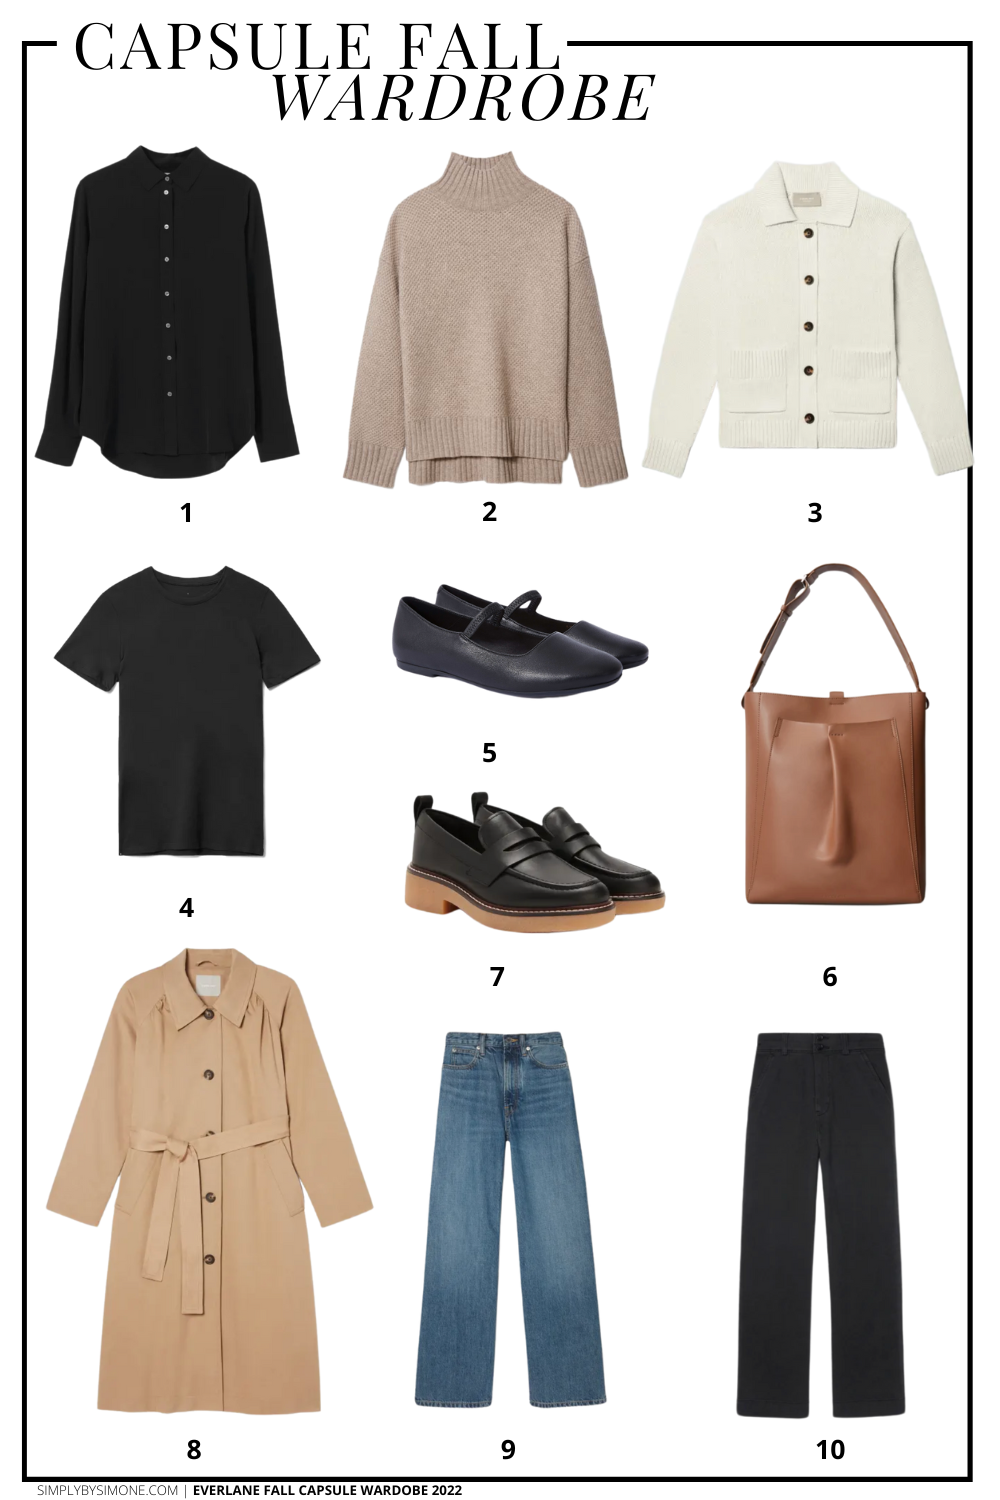 Affordable Everlane Fall Capsule Wardrobe | 10 Pieces, 24 Outfits | How to Build a Capsule Wardrobe | Everlane Fall Clothes | Outfit Inspiration | 24 Fall Weather Outfit Ideas | Fall Vacation Packing Guide | Everlane Fall Capsule Wardrobe | 10 Items to Wear This Fall | Items 1-10 | Simply by Simone